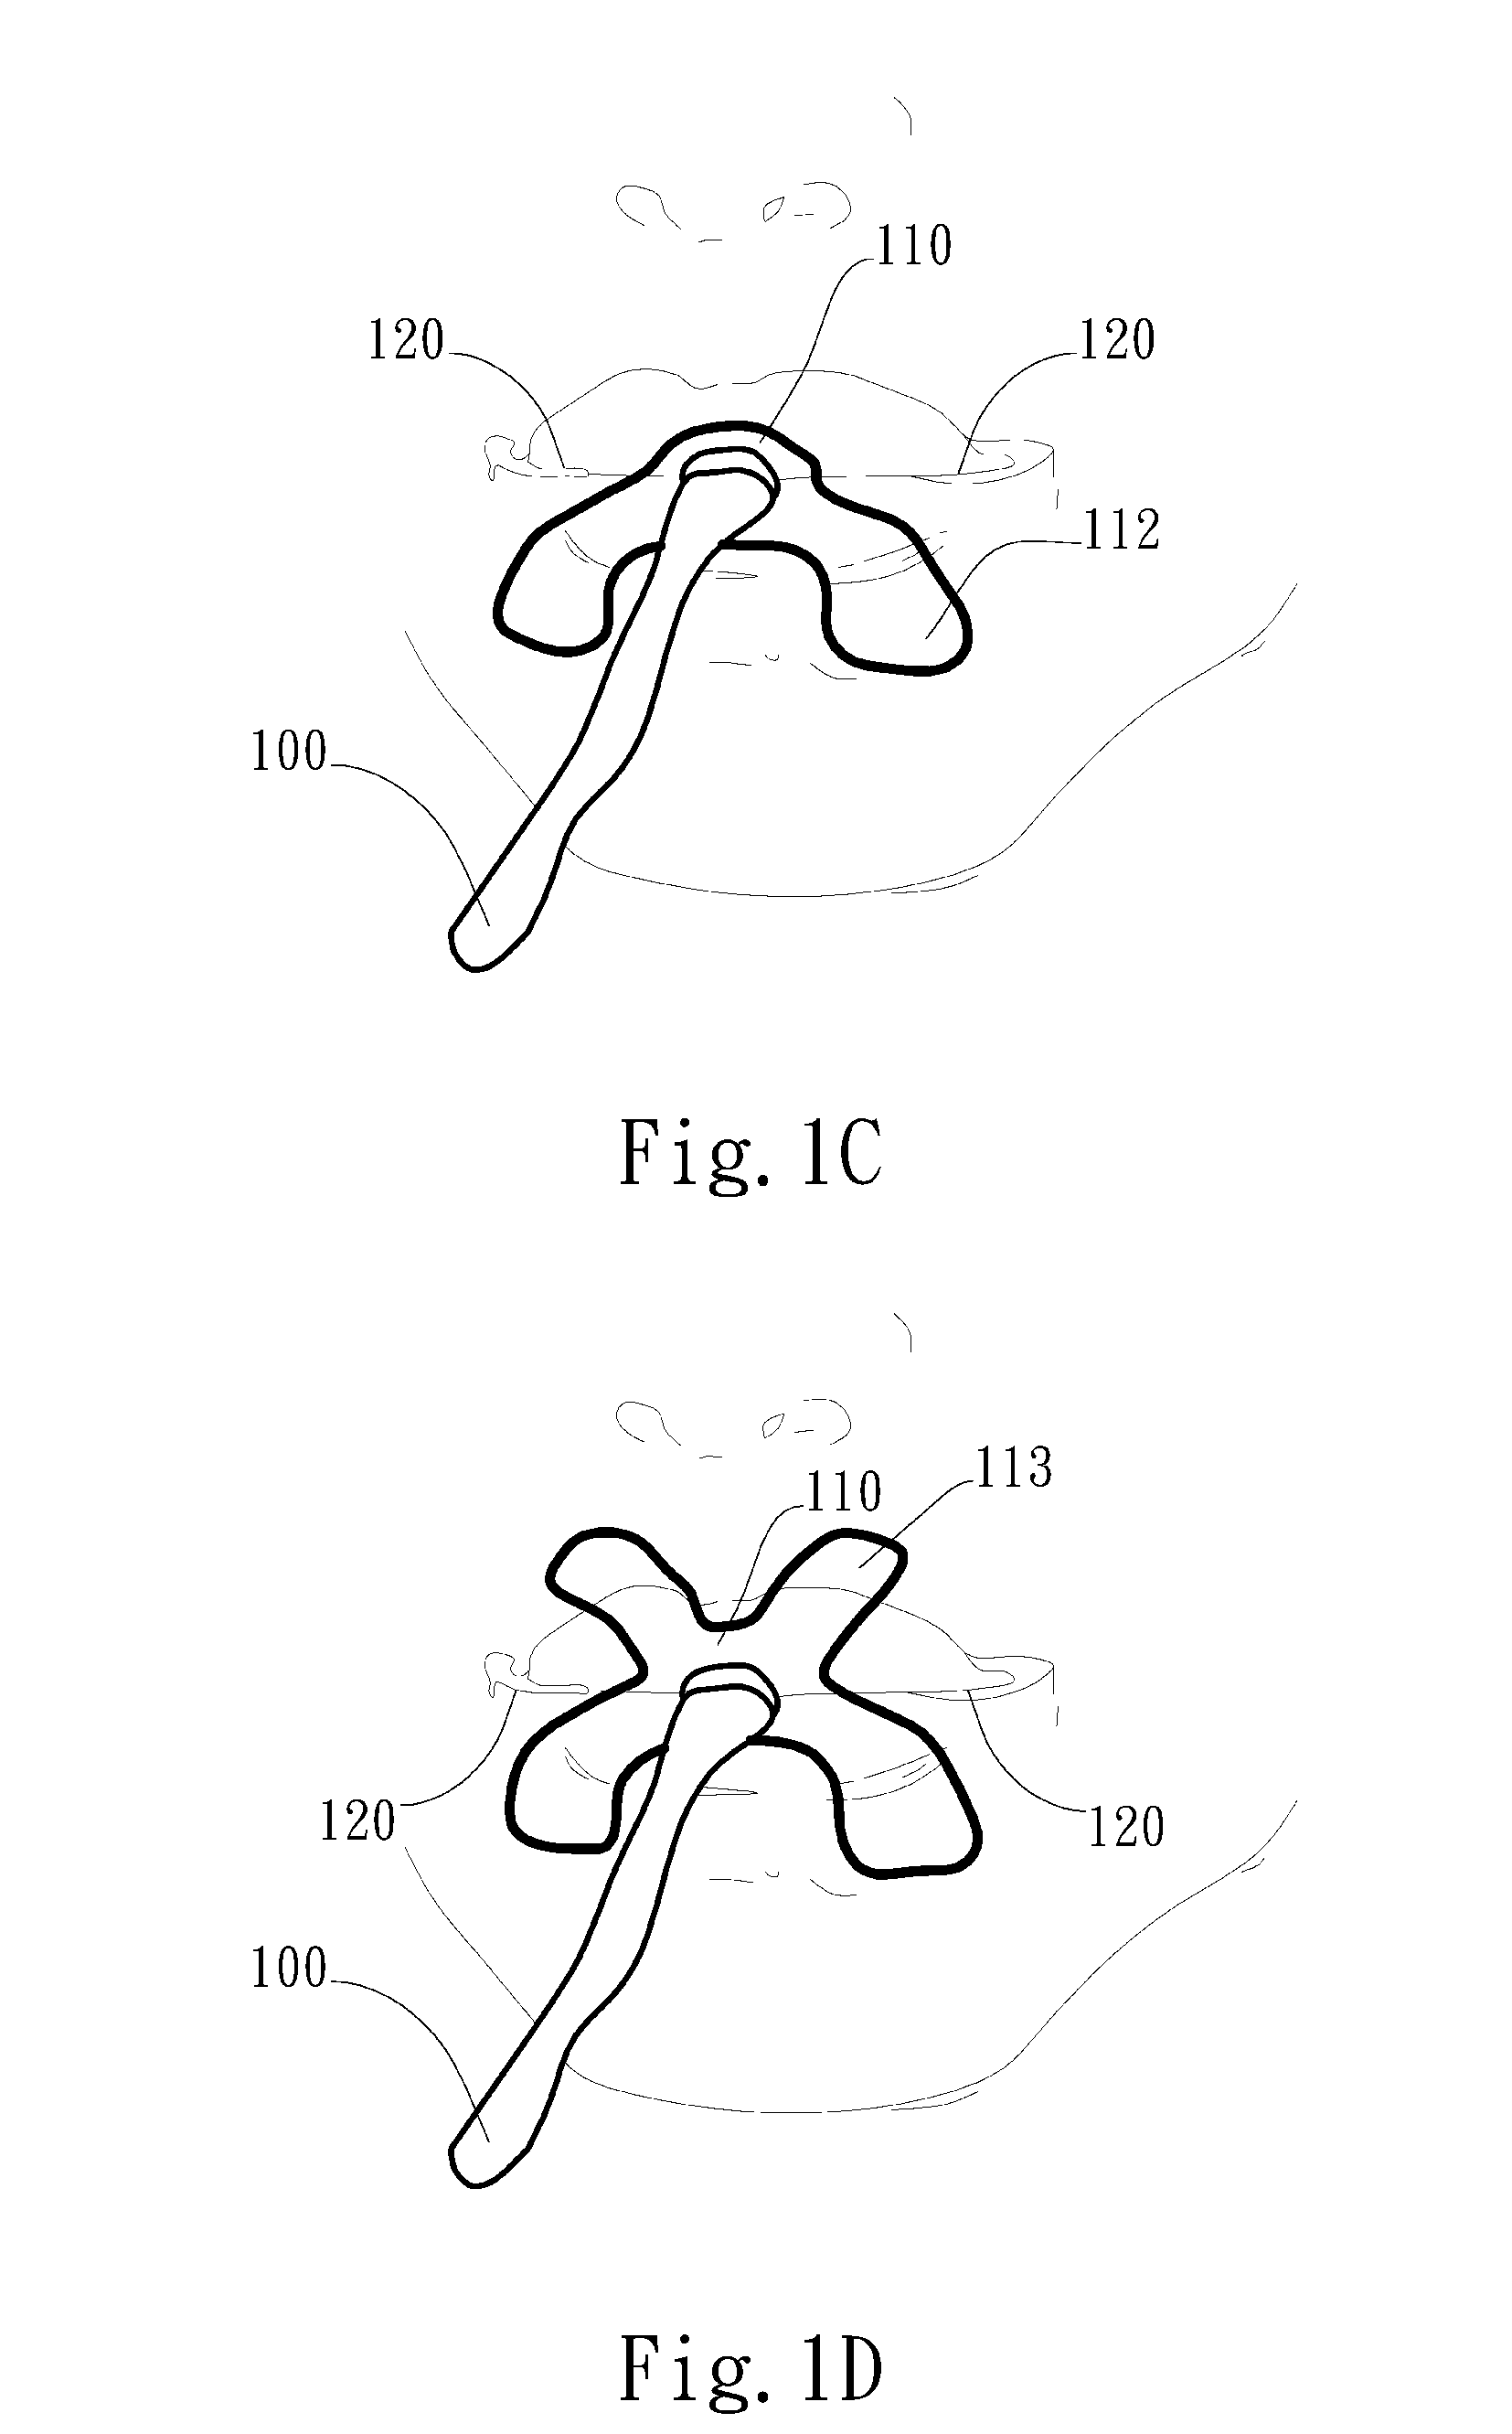 Adjustable oral interface and method to maintain upper airway patency